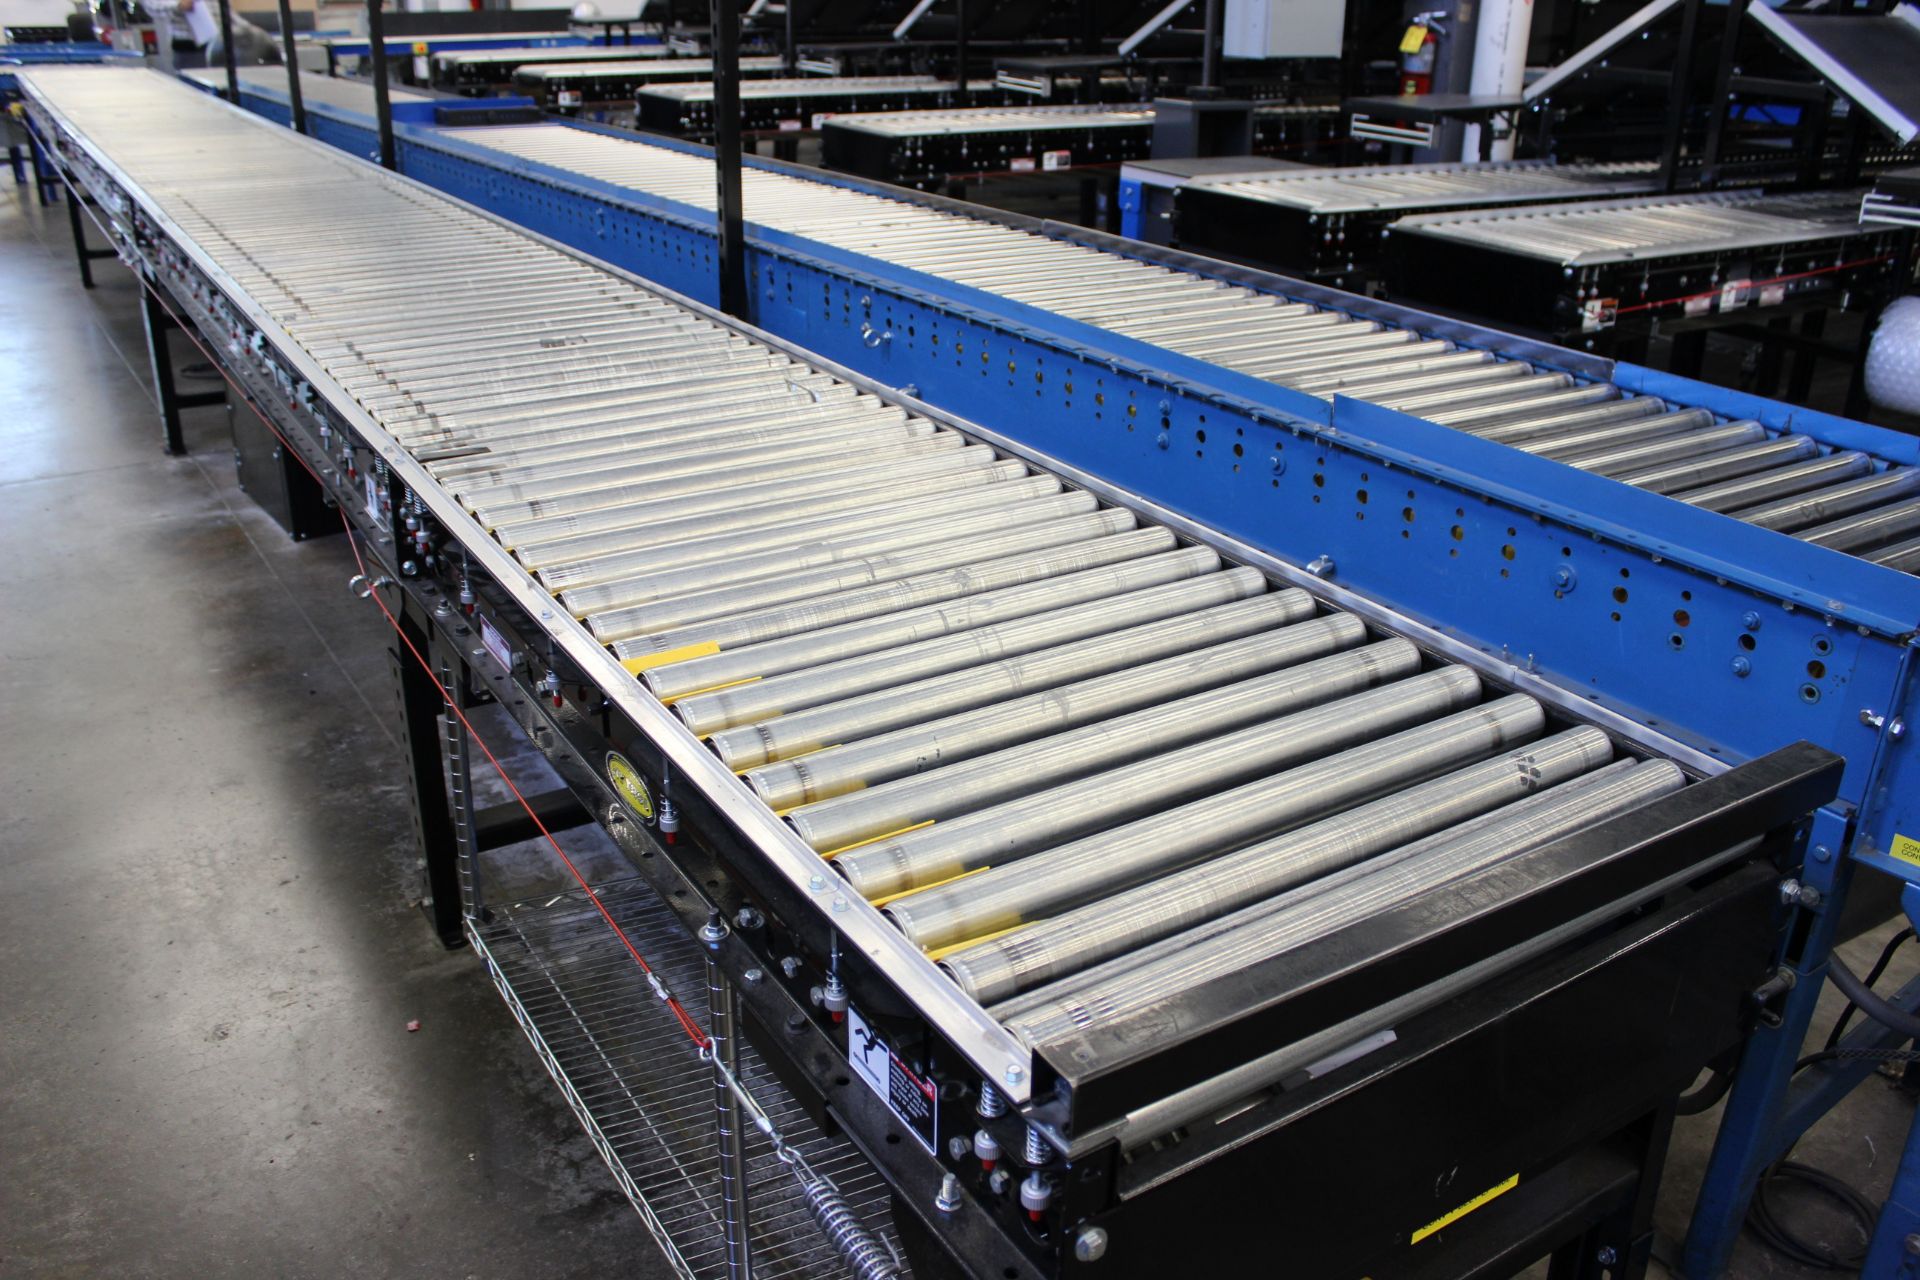 35 FT LONG HYTROL POWERED CONVEYOR, CLICK HERE TO WATCH VIDEO